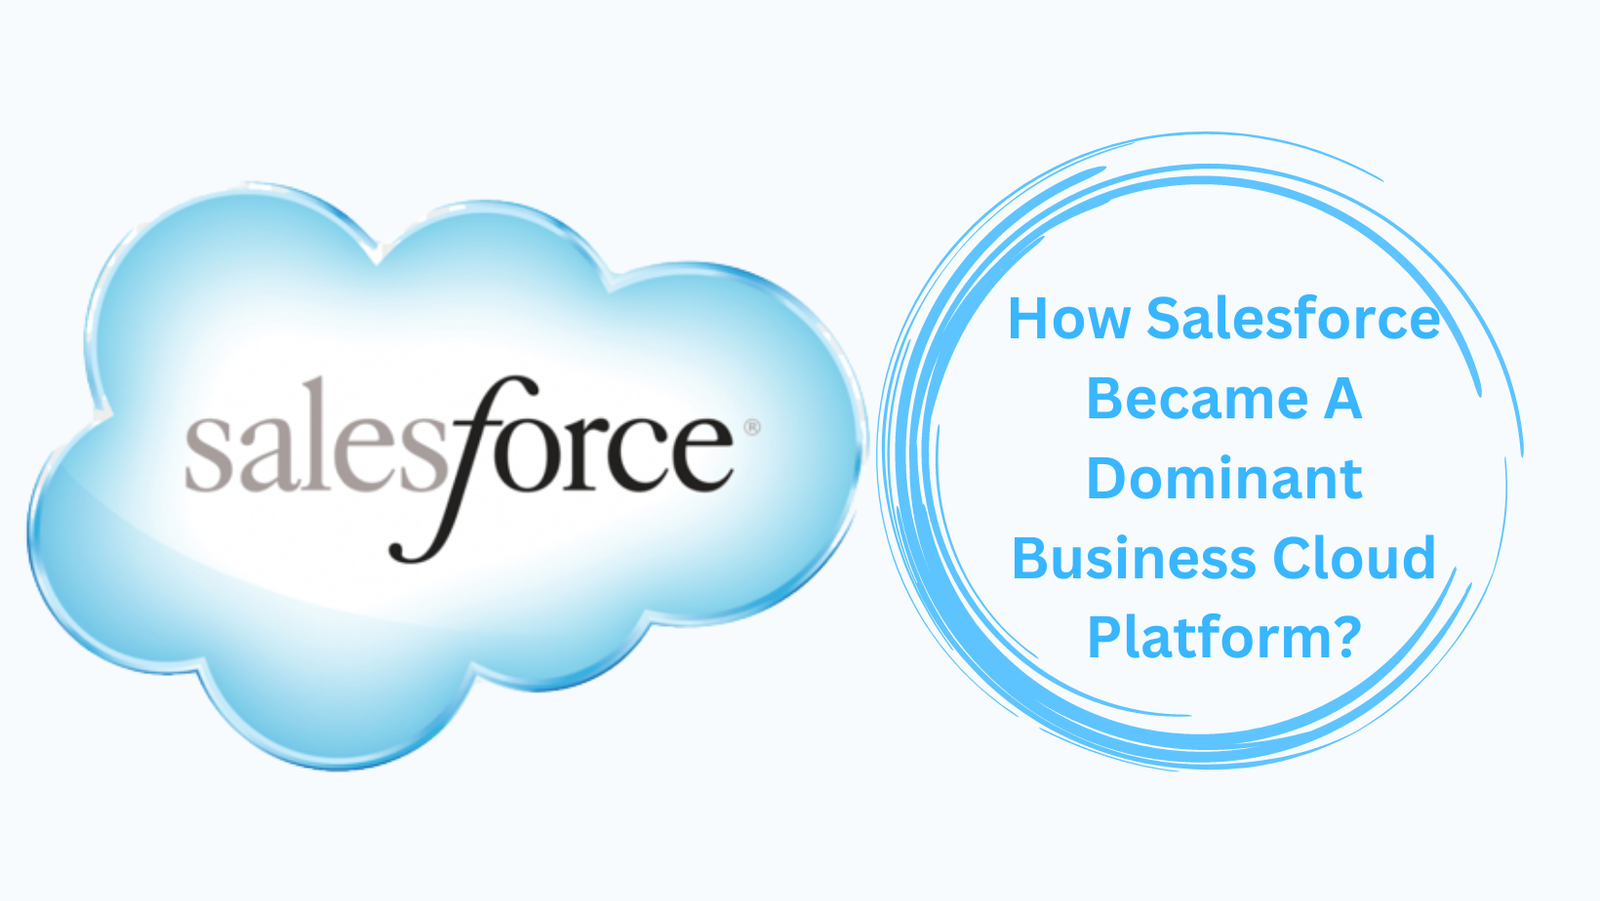 How Salesforce Became As A Dominant Business Cloud Platform?